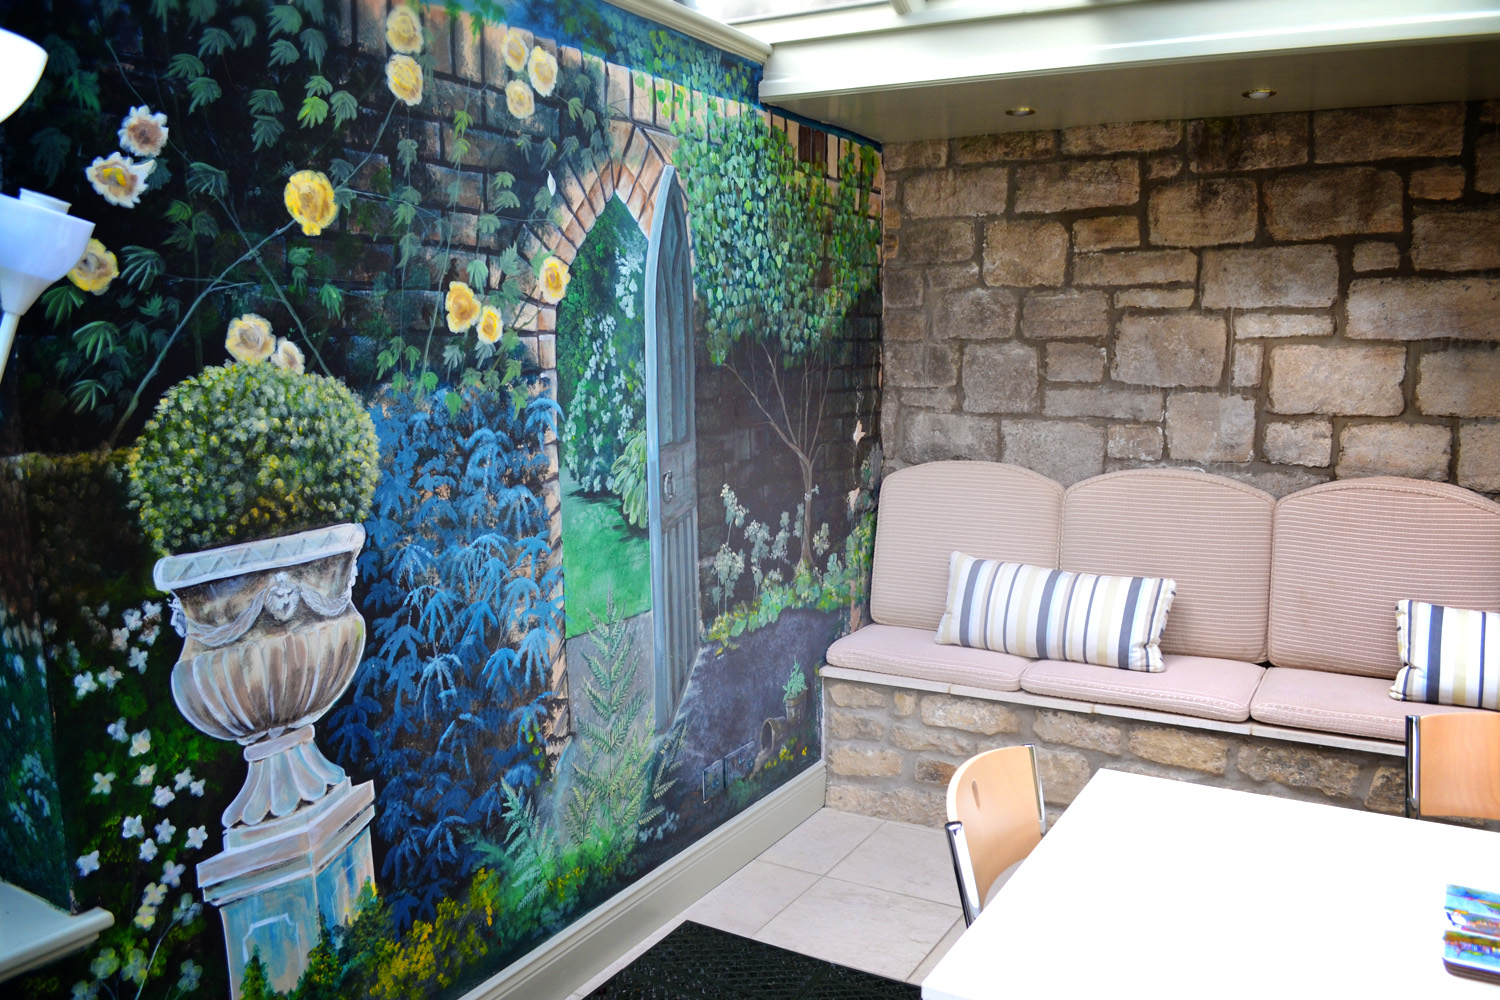 Conservatory mural